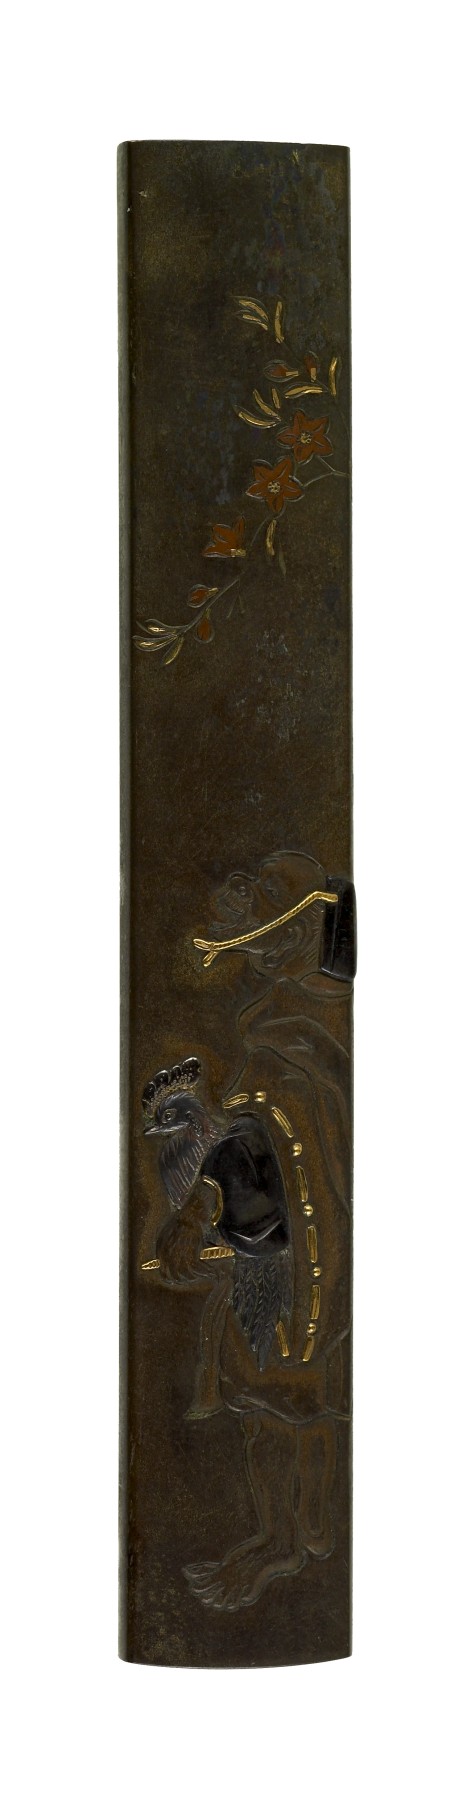 Image for Kozuka with a Man and a Rooster